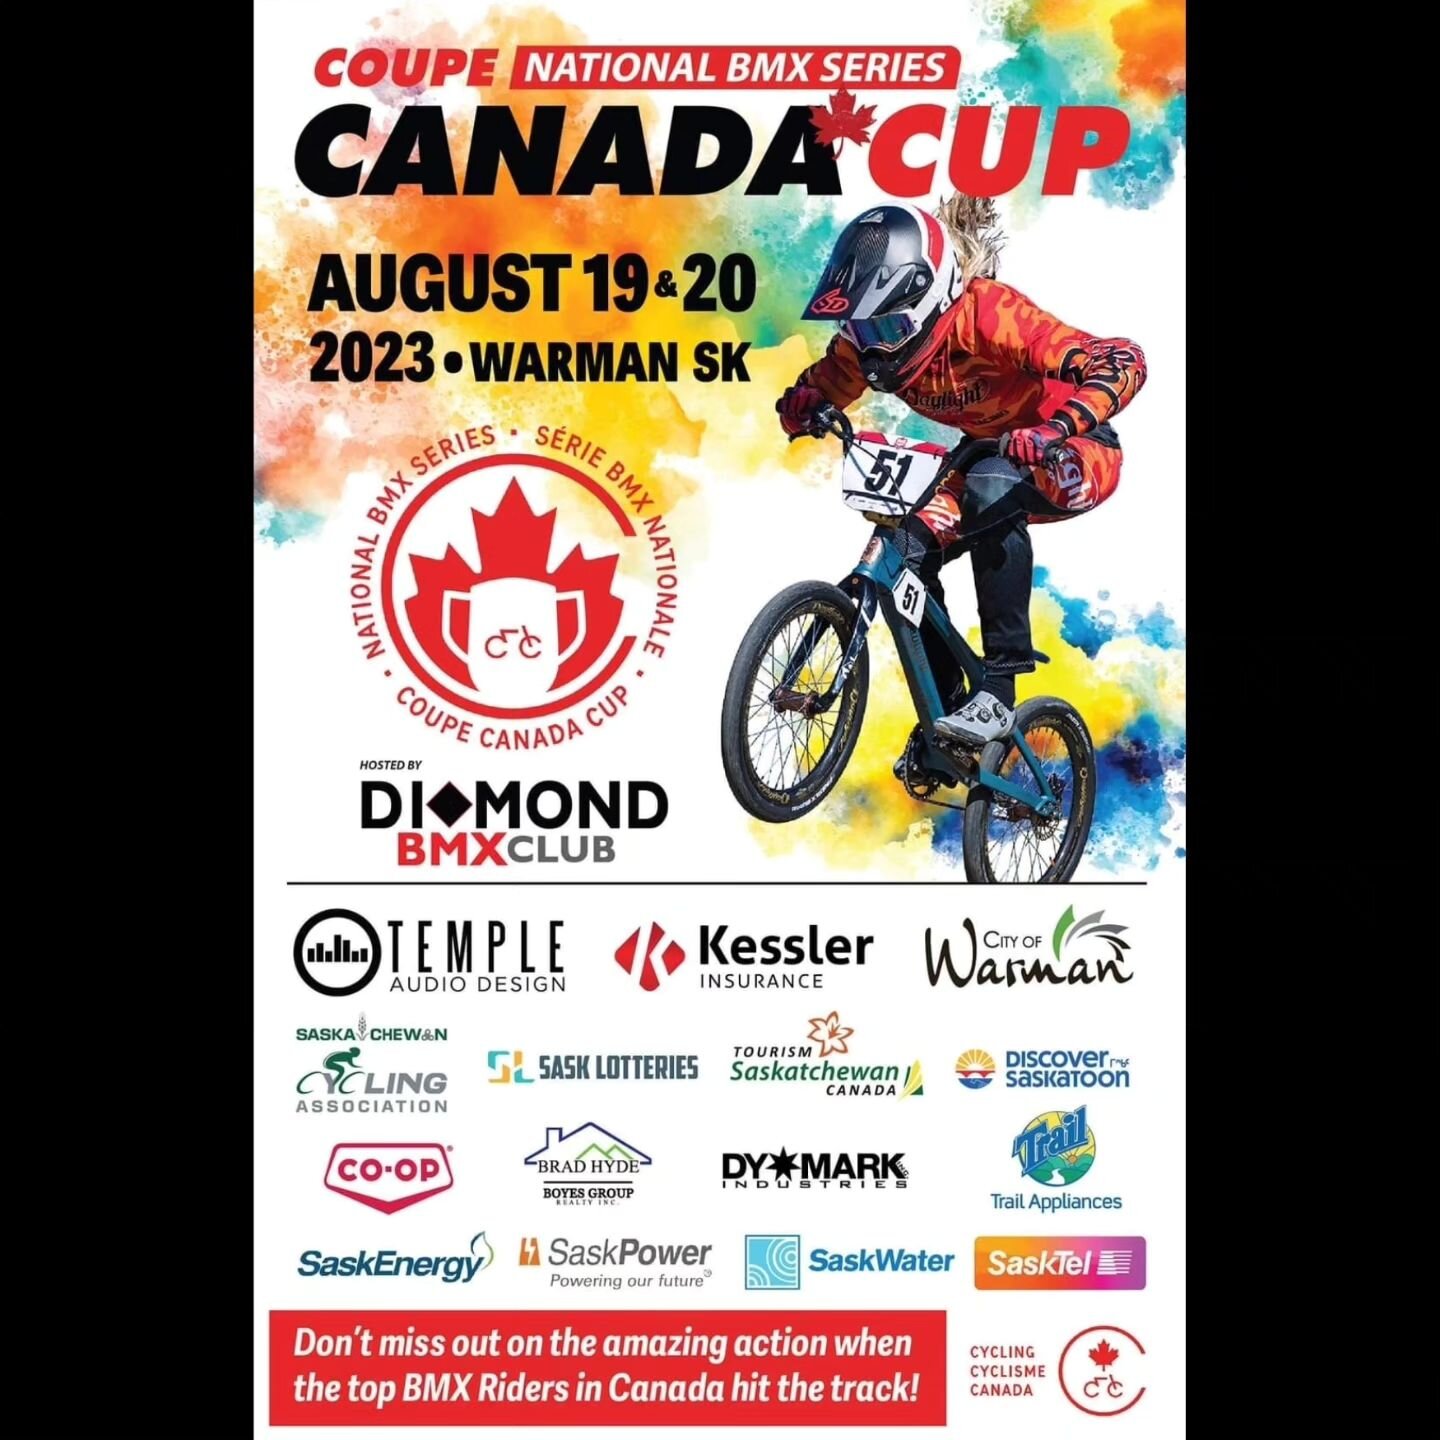 We did it, Saskatchewan! Small town feel with a big cheer 🇨🇦

We'd like to thank each and every one of you for coming out and making the 2023 Warman BMX Canada Cup #4&amp;#5  and Sask Cup Races #3&amp;#4 a positive, exciting and successful event!

